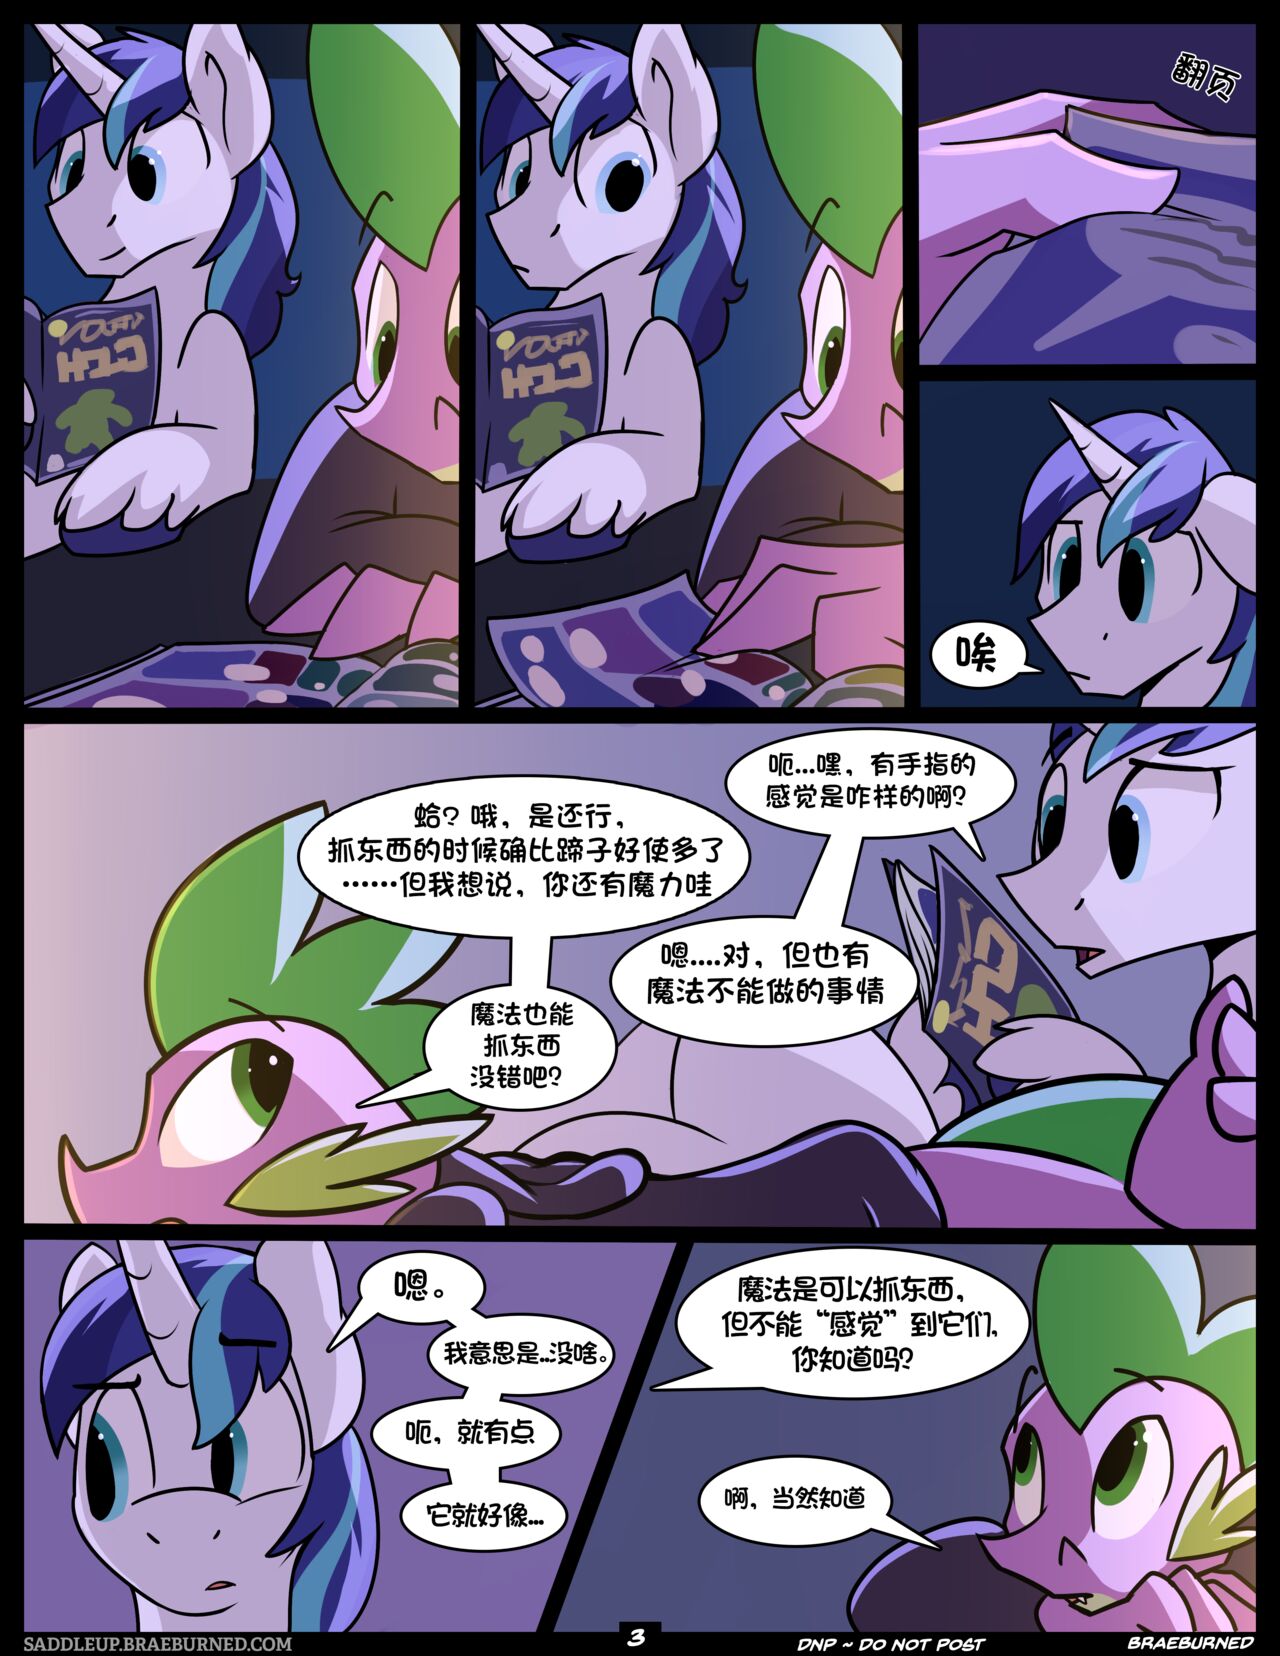 [Braeburned] Comic Relief (My Little Pony Friendship Is Magic)[Chinese][On-going][DrrT翻译] 